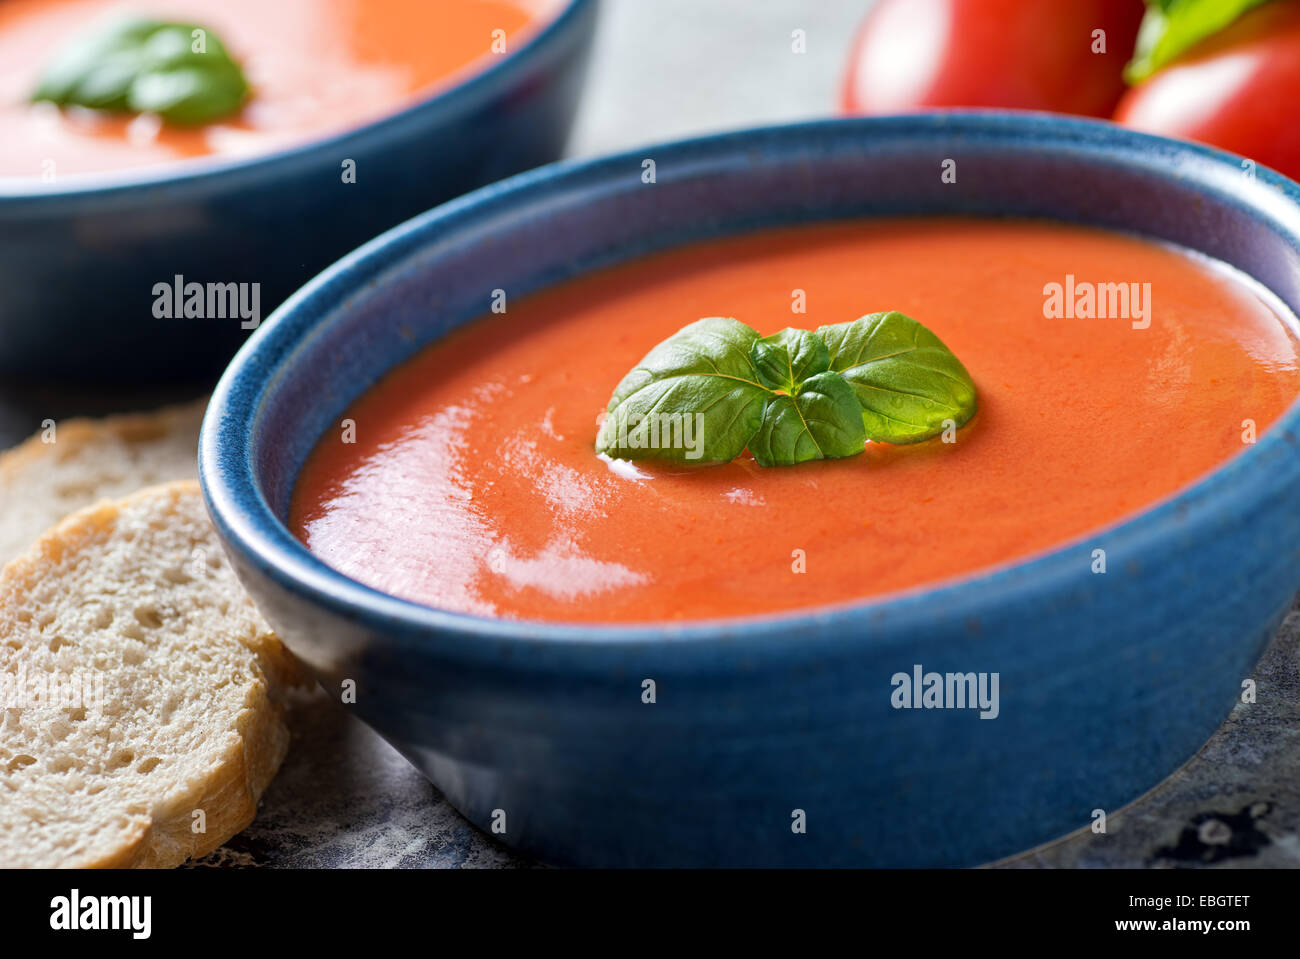 A bowl of delicious home made tomato basil soup. Stock Photo